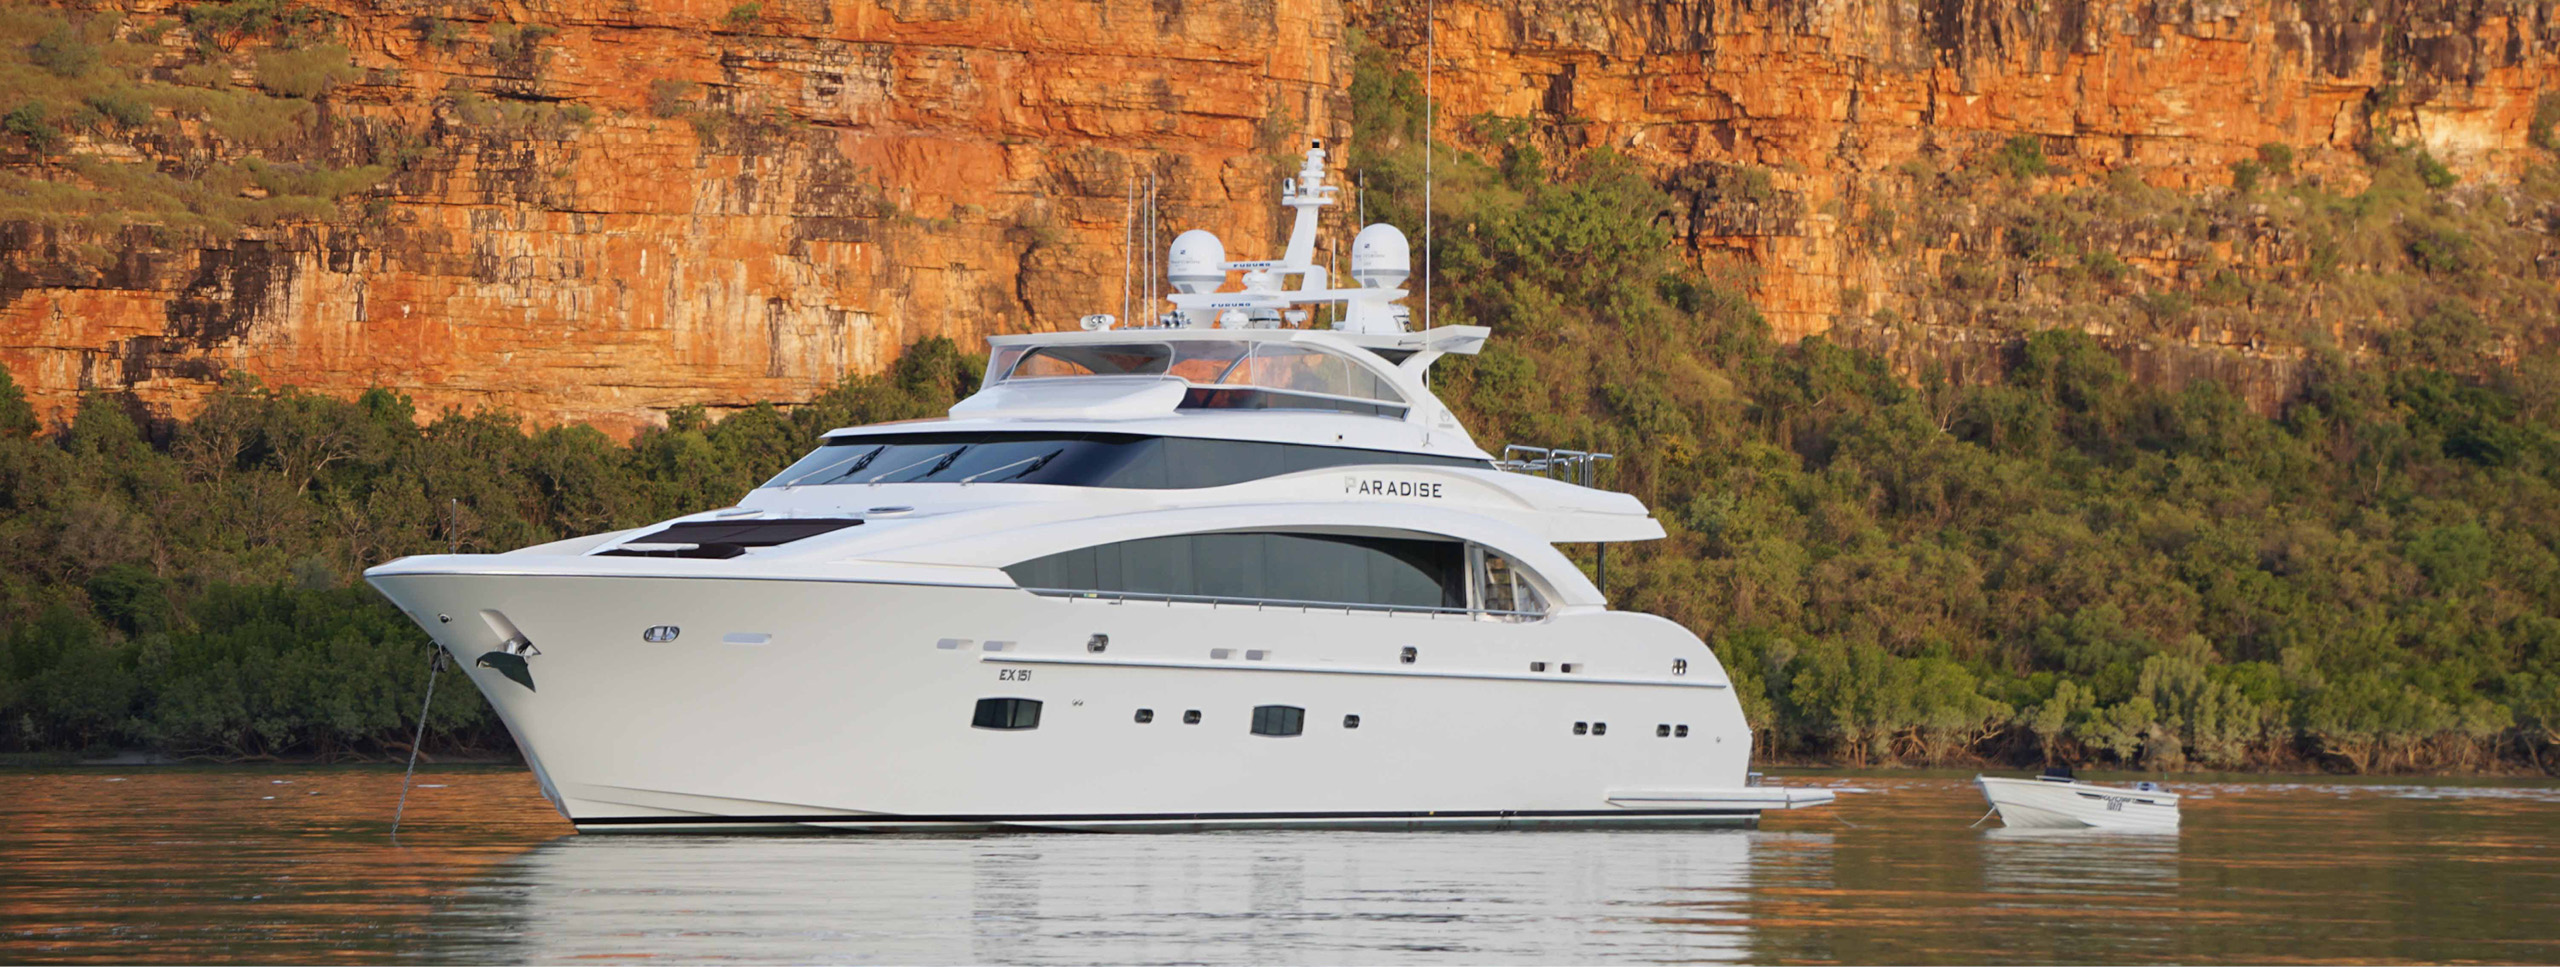 small yachts for sale perth